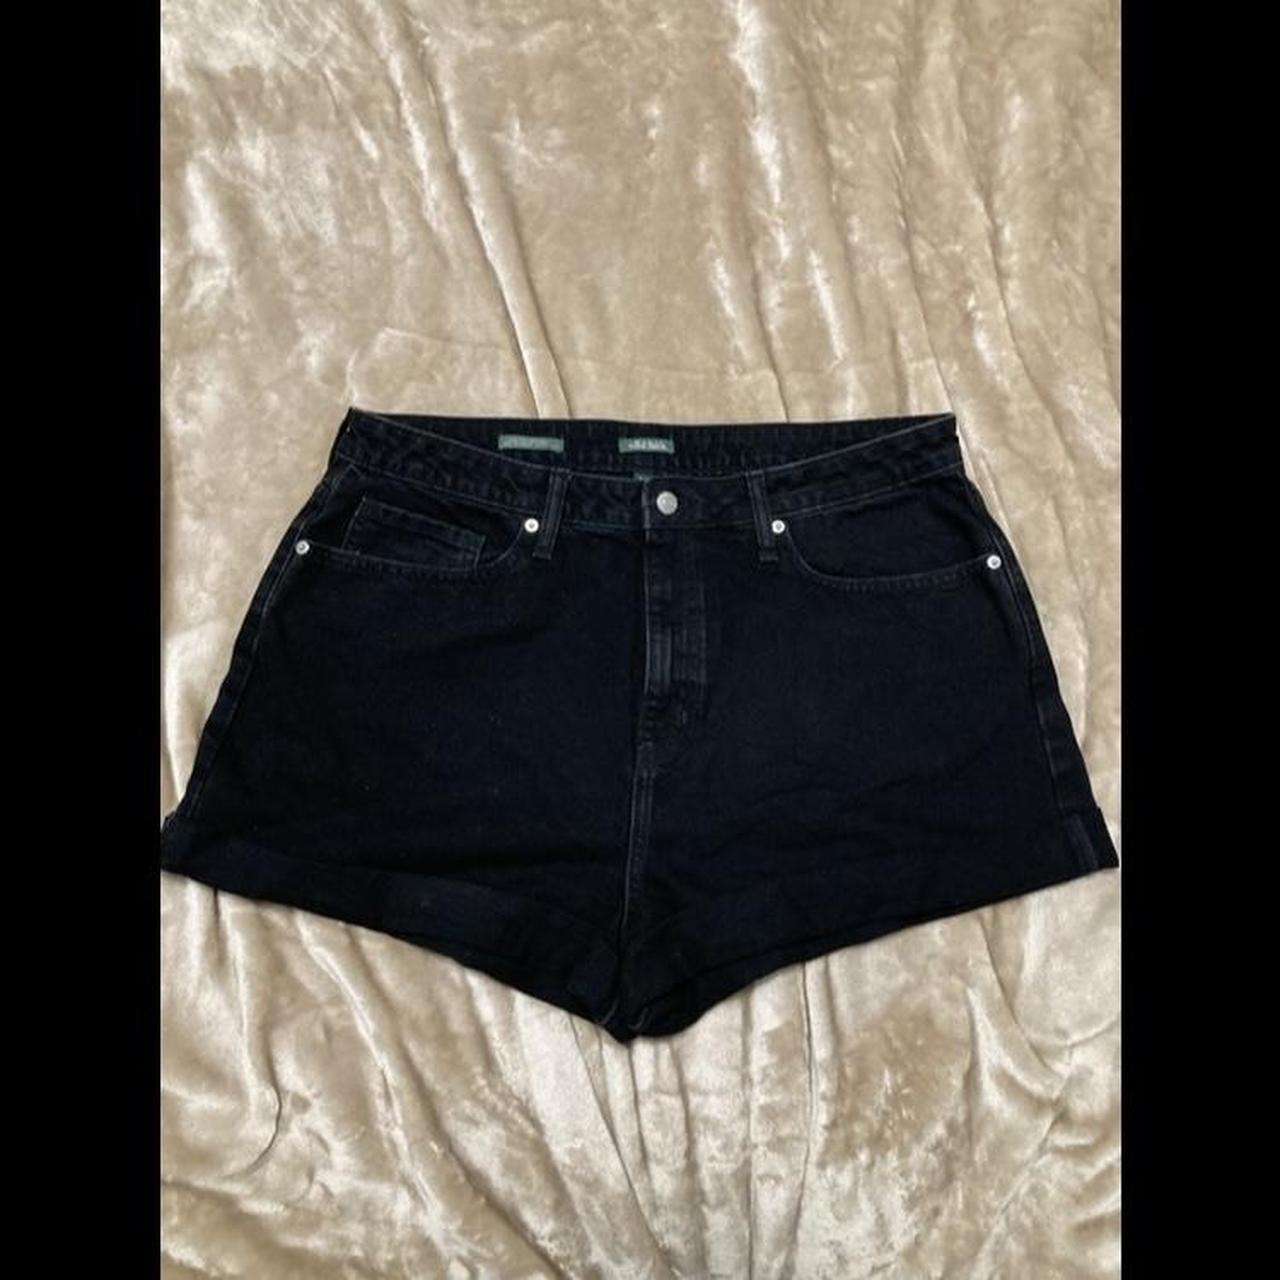 Black Wild fable high rise mom shorts Shorts are mid... - Depop